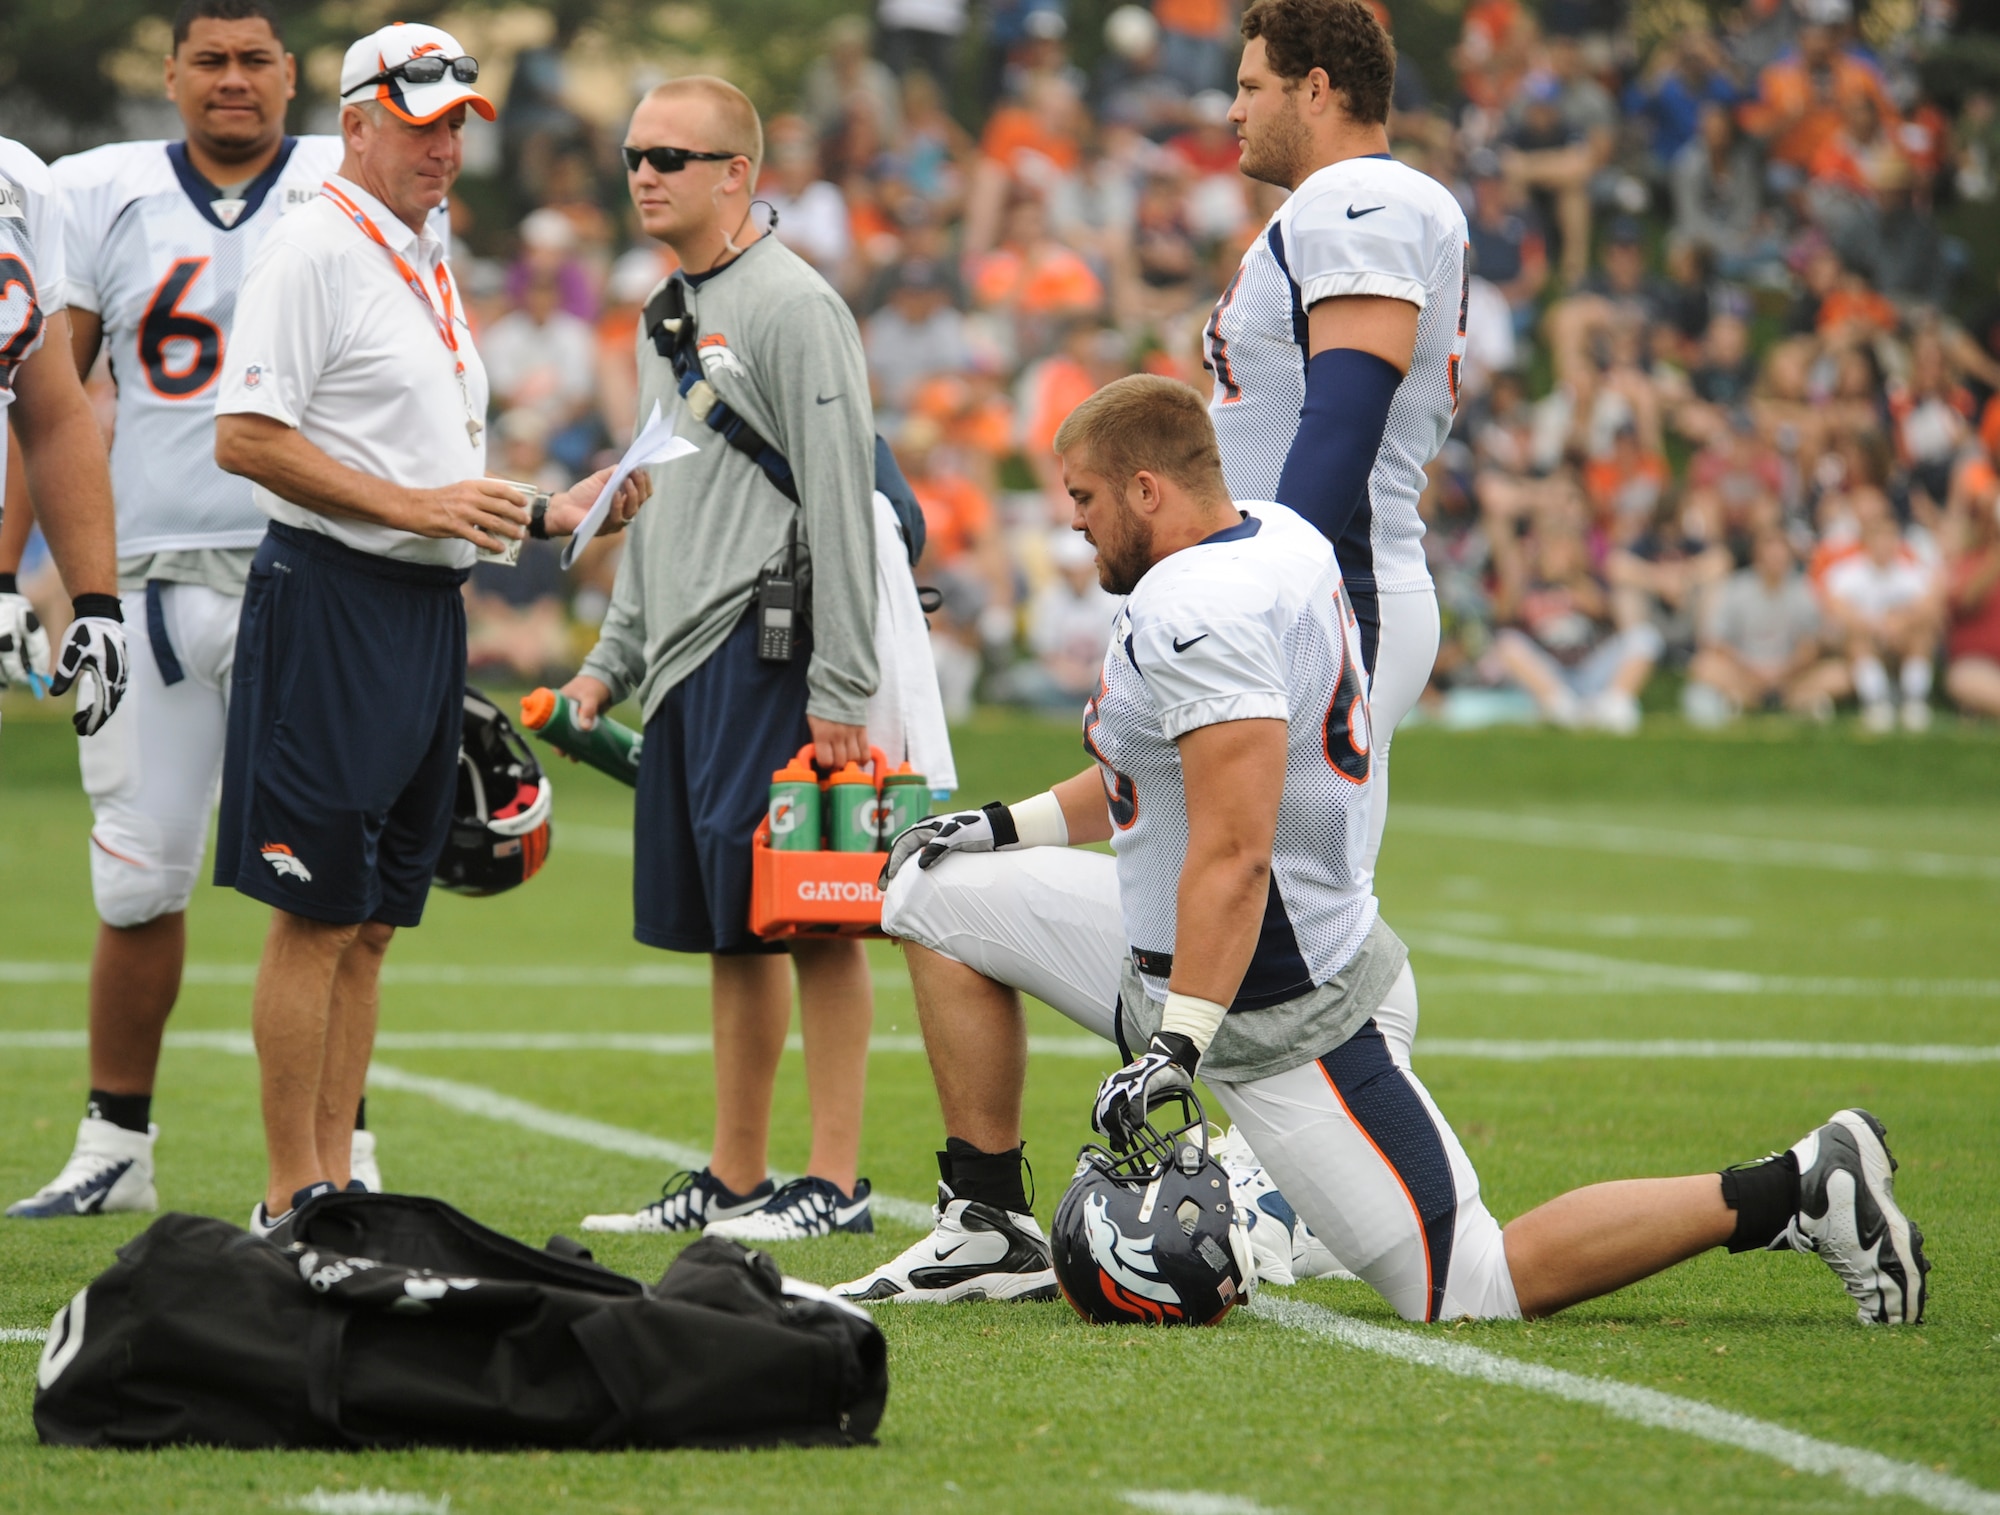 Benjamin Garland, Denver Broncos offensive guard, kneeling, listens to head coach John Fox before a Broncos training camp practice July 29, 2013, at the Broncos training facility, Englewood, Colo.  Garland spent last season on the Broncos practice squad and transitioned from defensive tackle to offensive guard before the Broncos 2013 mini-camp. Garland is also a first lieutenant for the 140th Wing, Colorado Air National Guard, and served his annual commitment during the early part of 2013. (U.S. Air Force photo by Staff Sgt. Christopher Gross/Released)